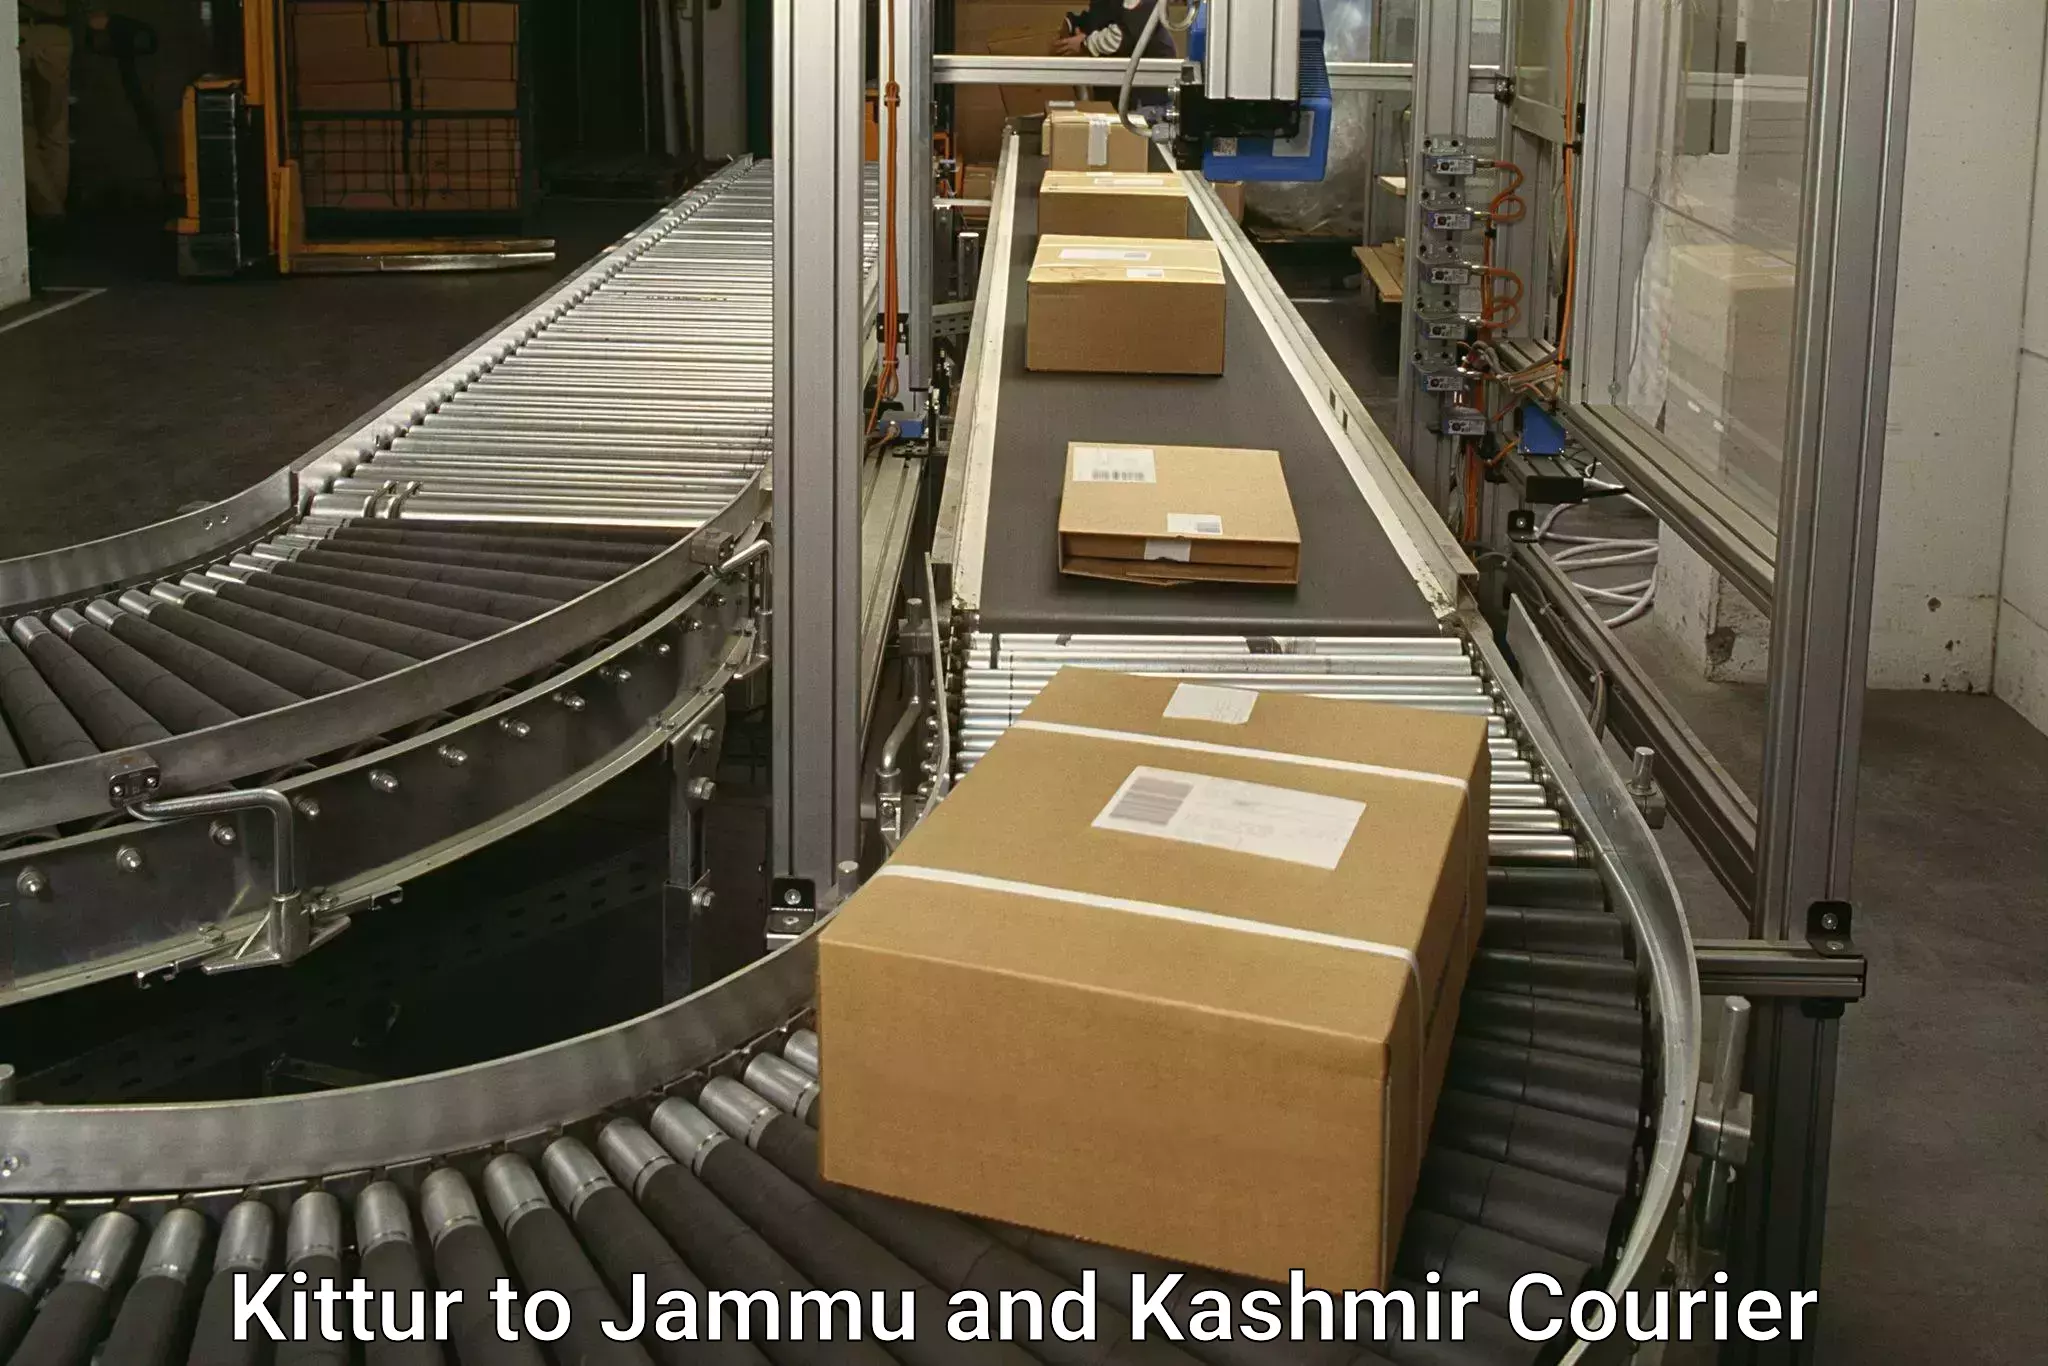 Multi-service courier options Kittur to Jammu and Kashmir